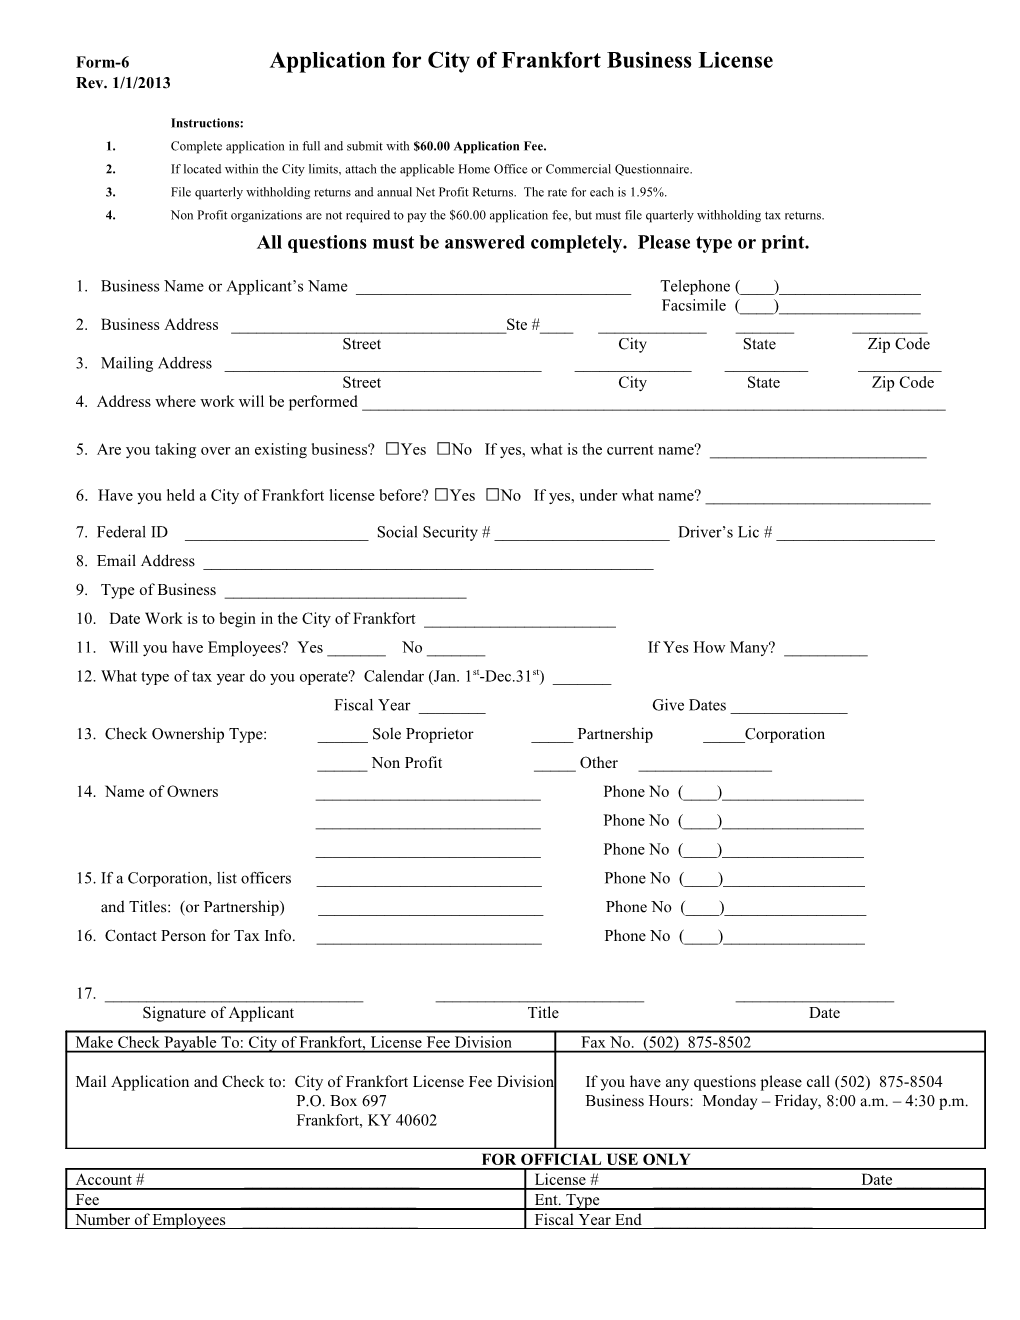 Form-6 Application For City Of Frankfort Business License